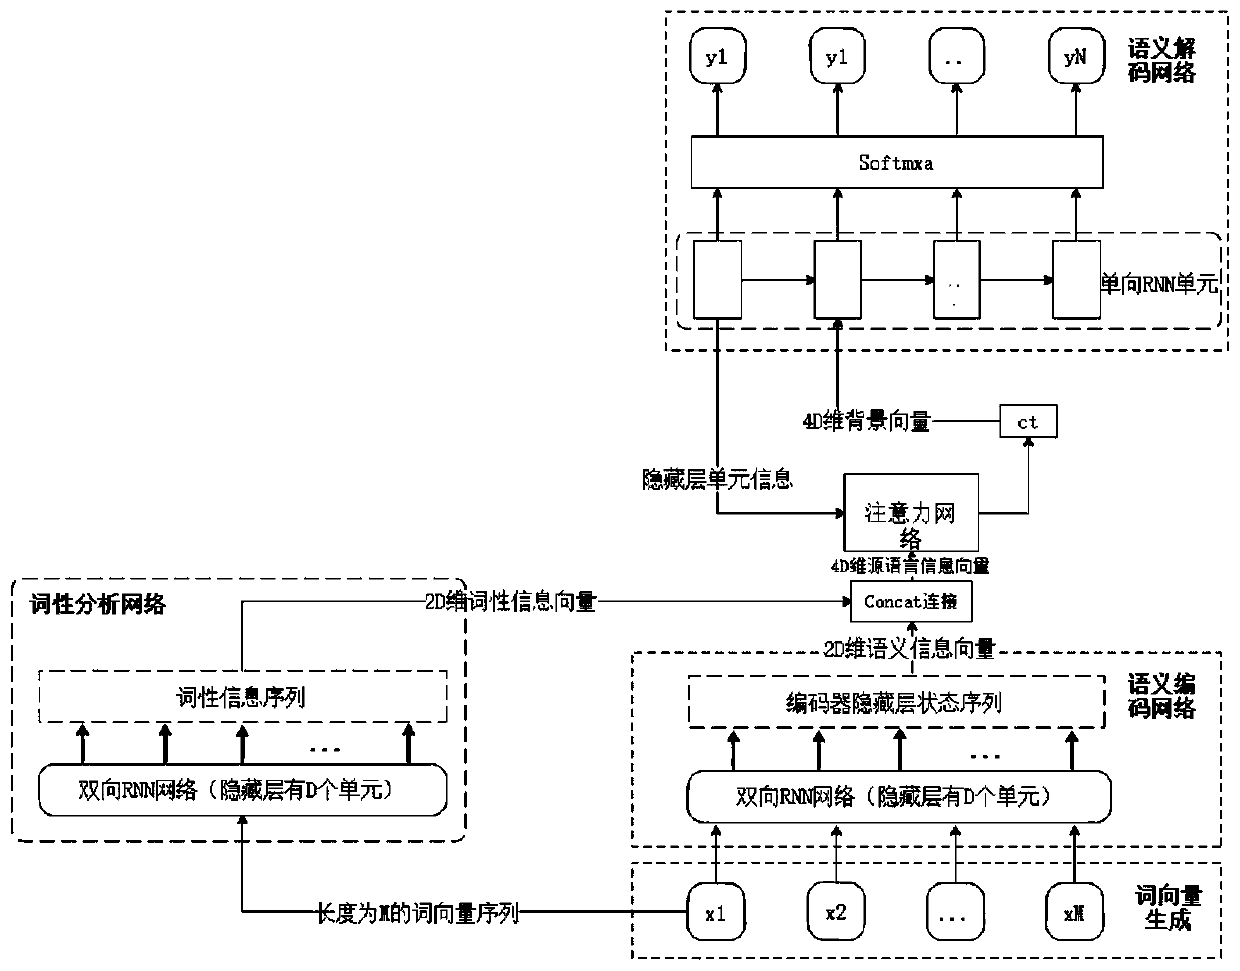 Chinese language processing model and method based on deep neural network